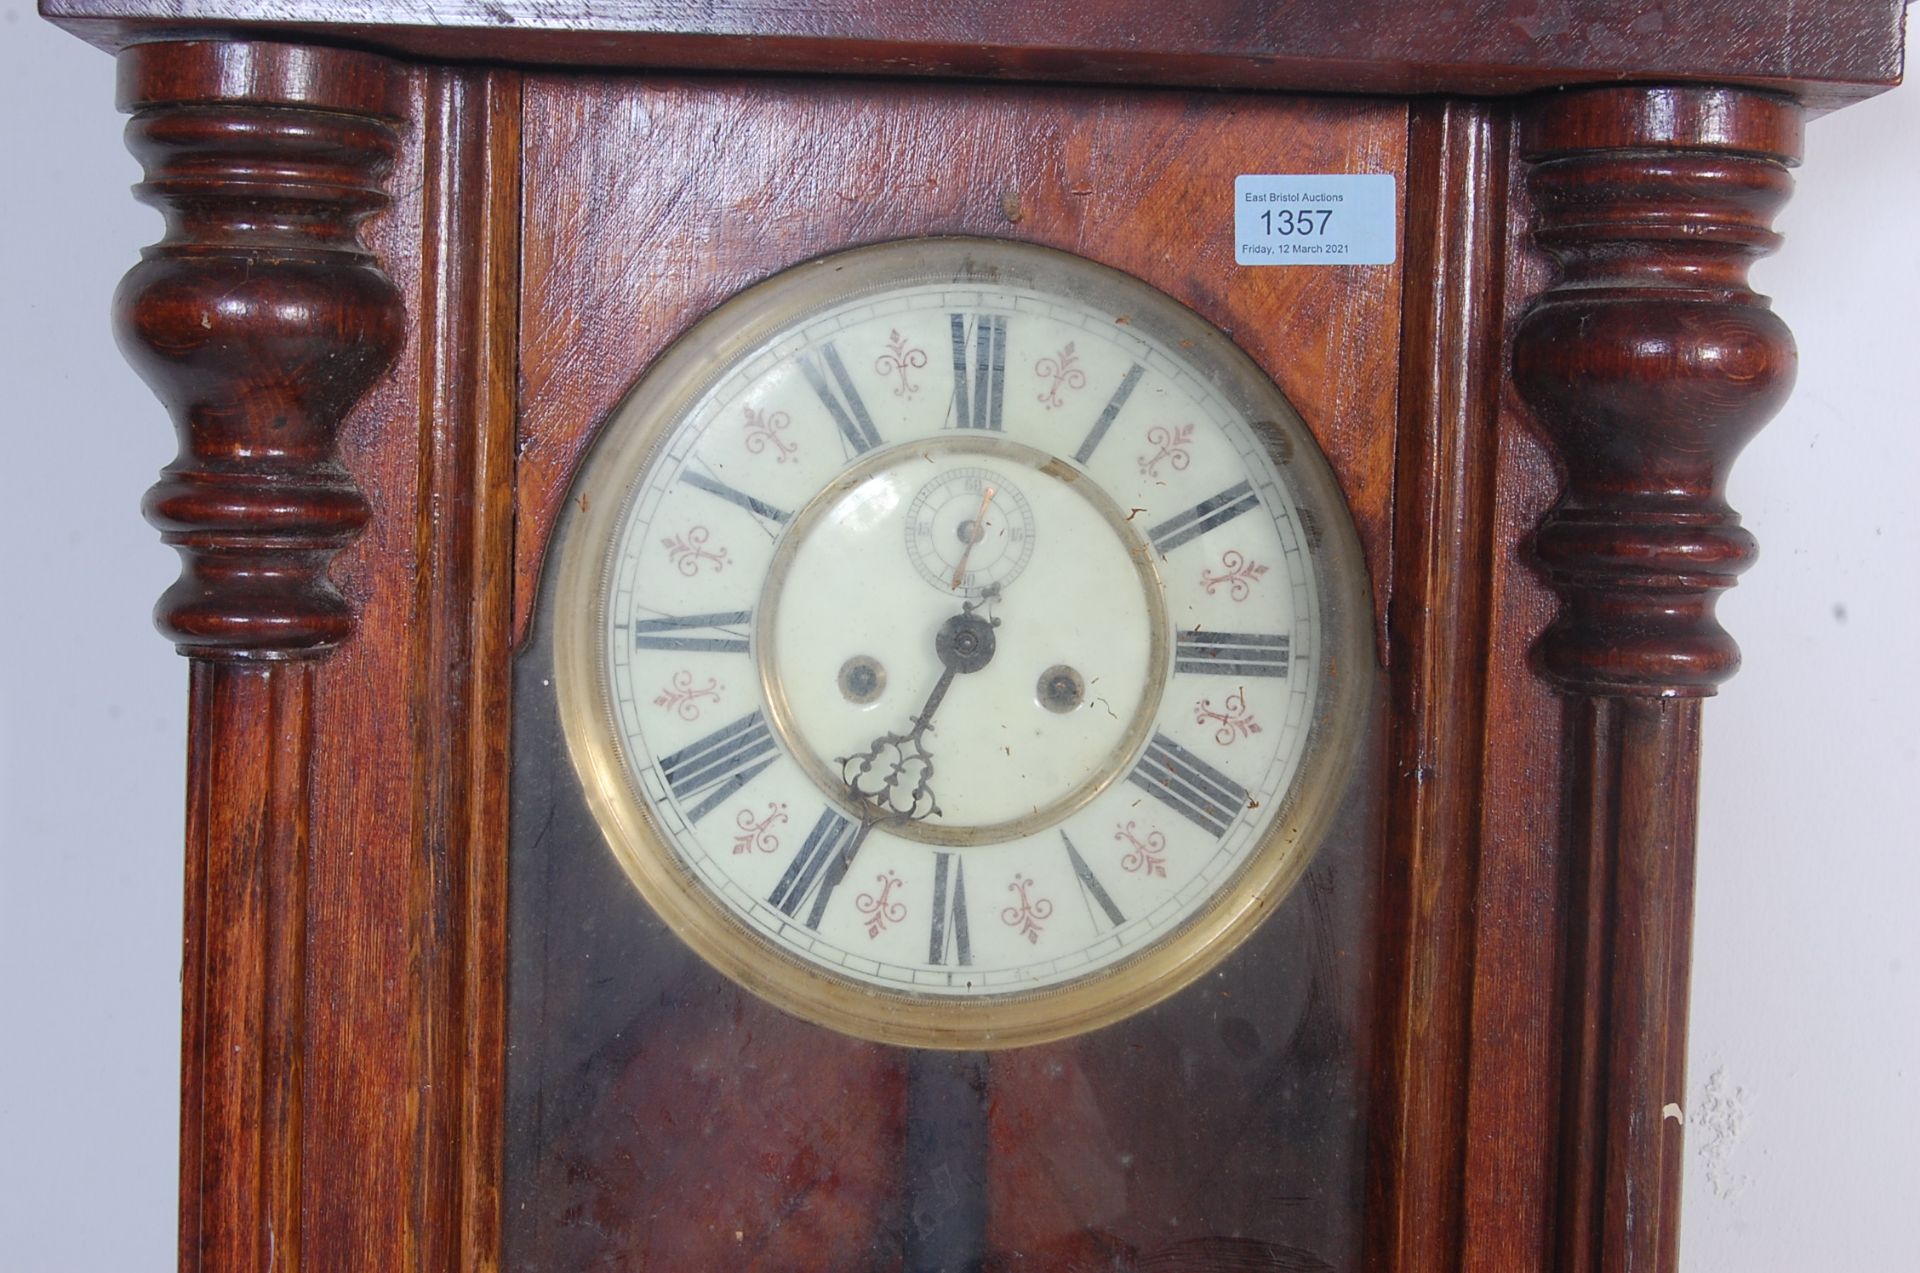 EARLY 20TH CENTURY MAHOGANY CASE VIENNA CLOCK WITH EIGHT DAYS MOVEMENT - Image 2 of 5